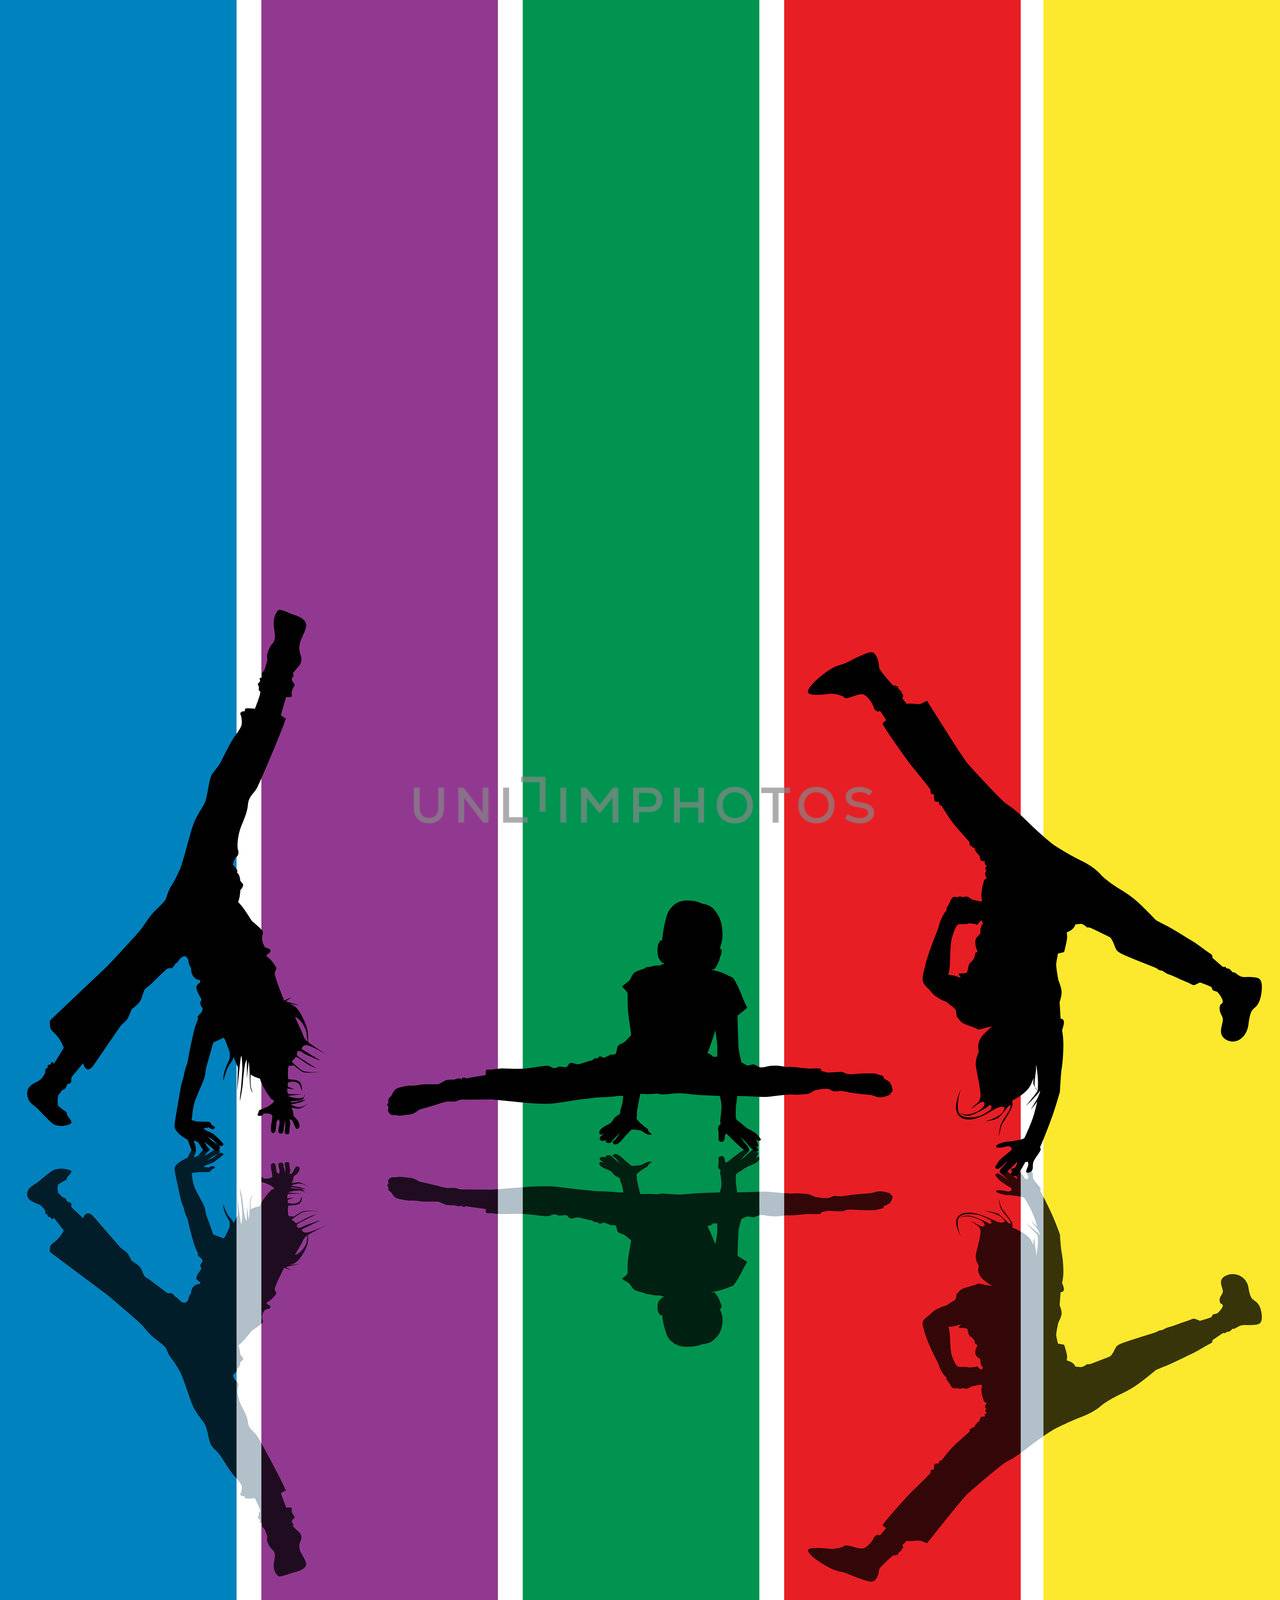 Abstract composition with jumping children silhouettes over a rainbow background